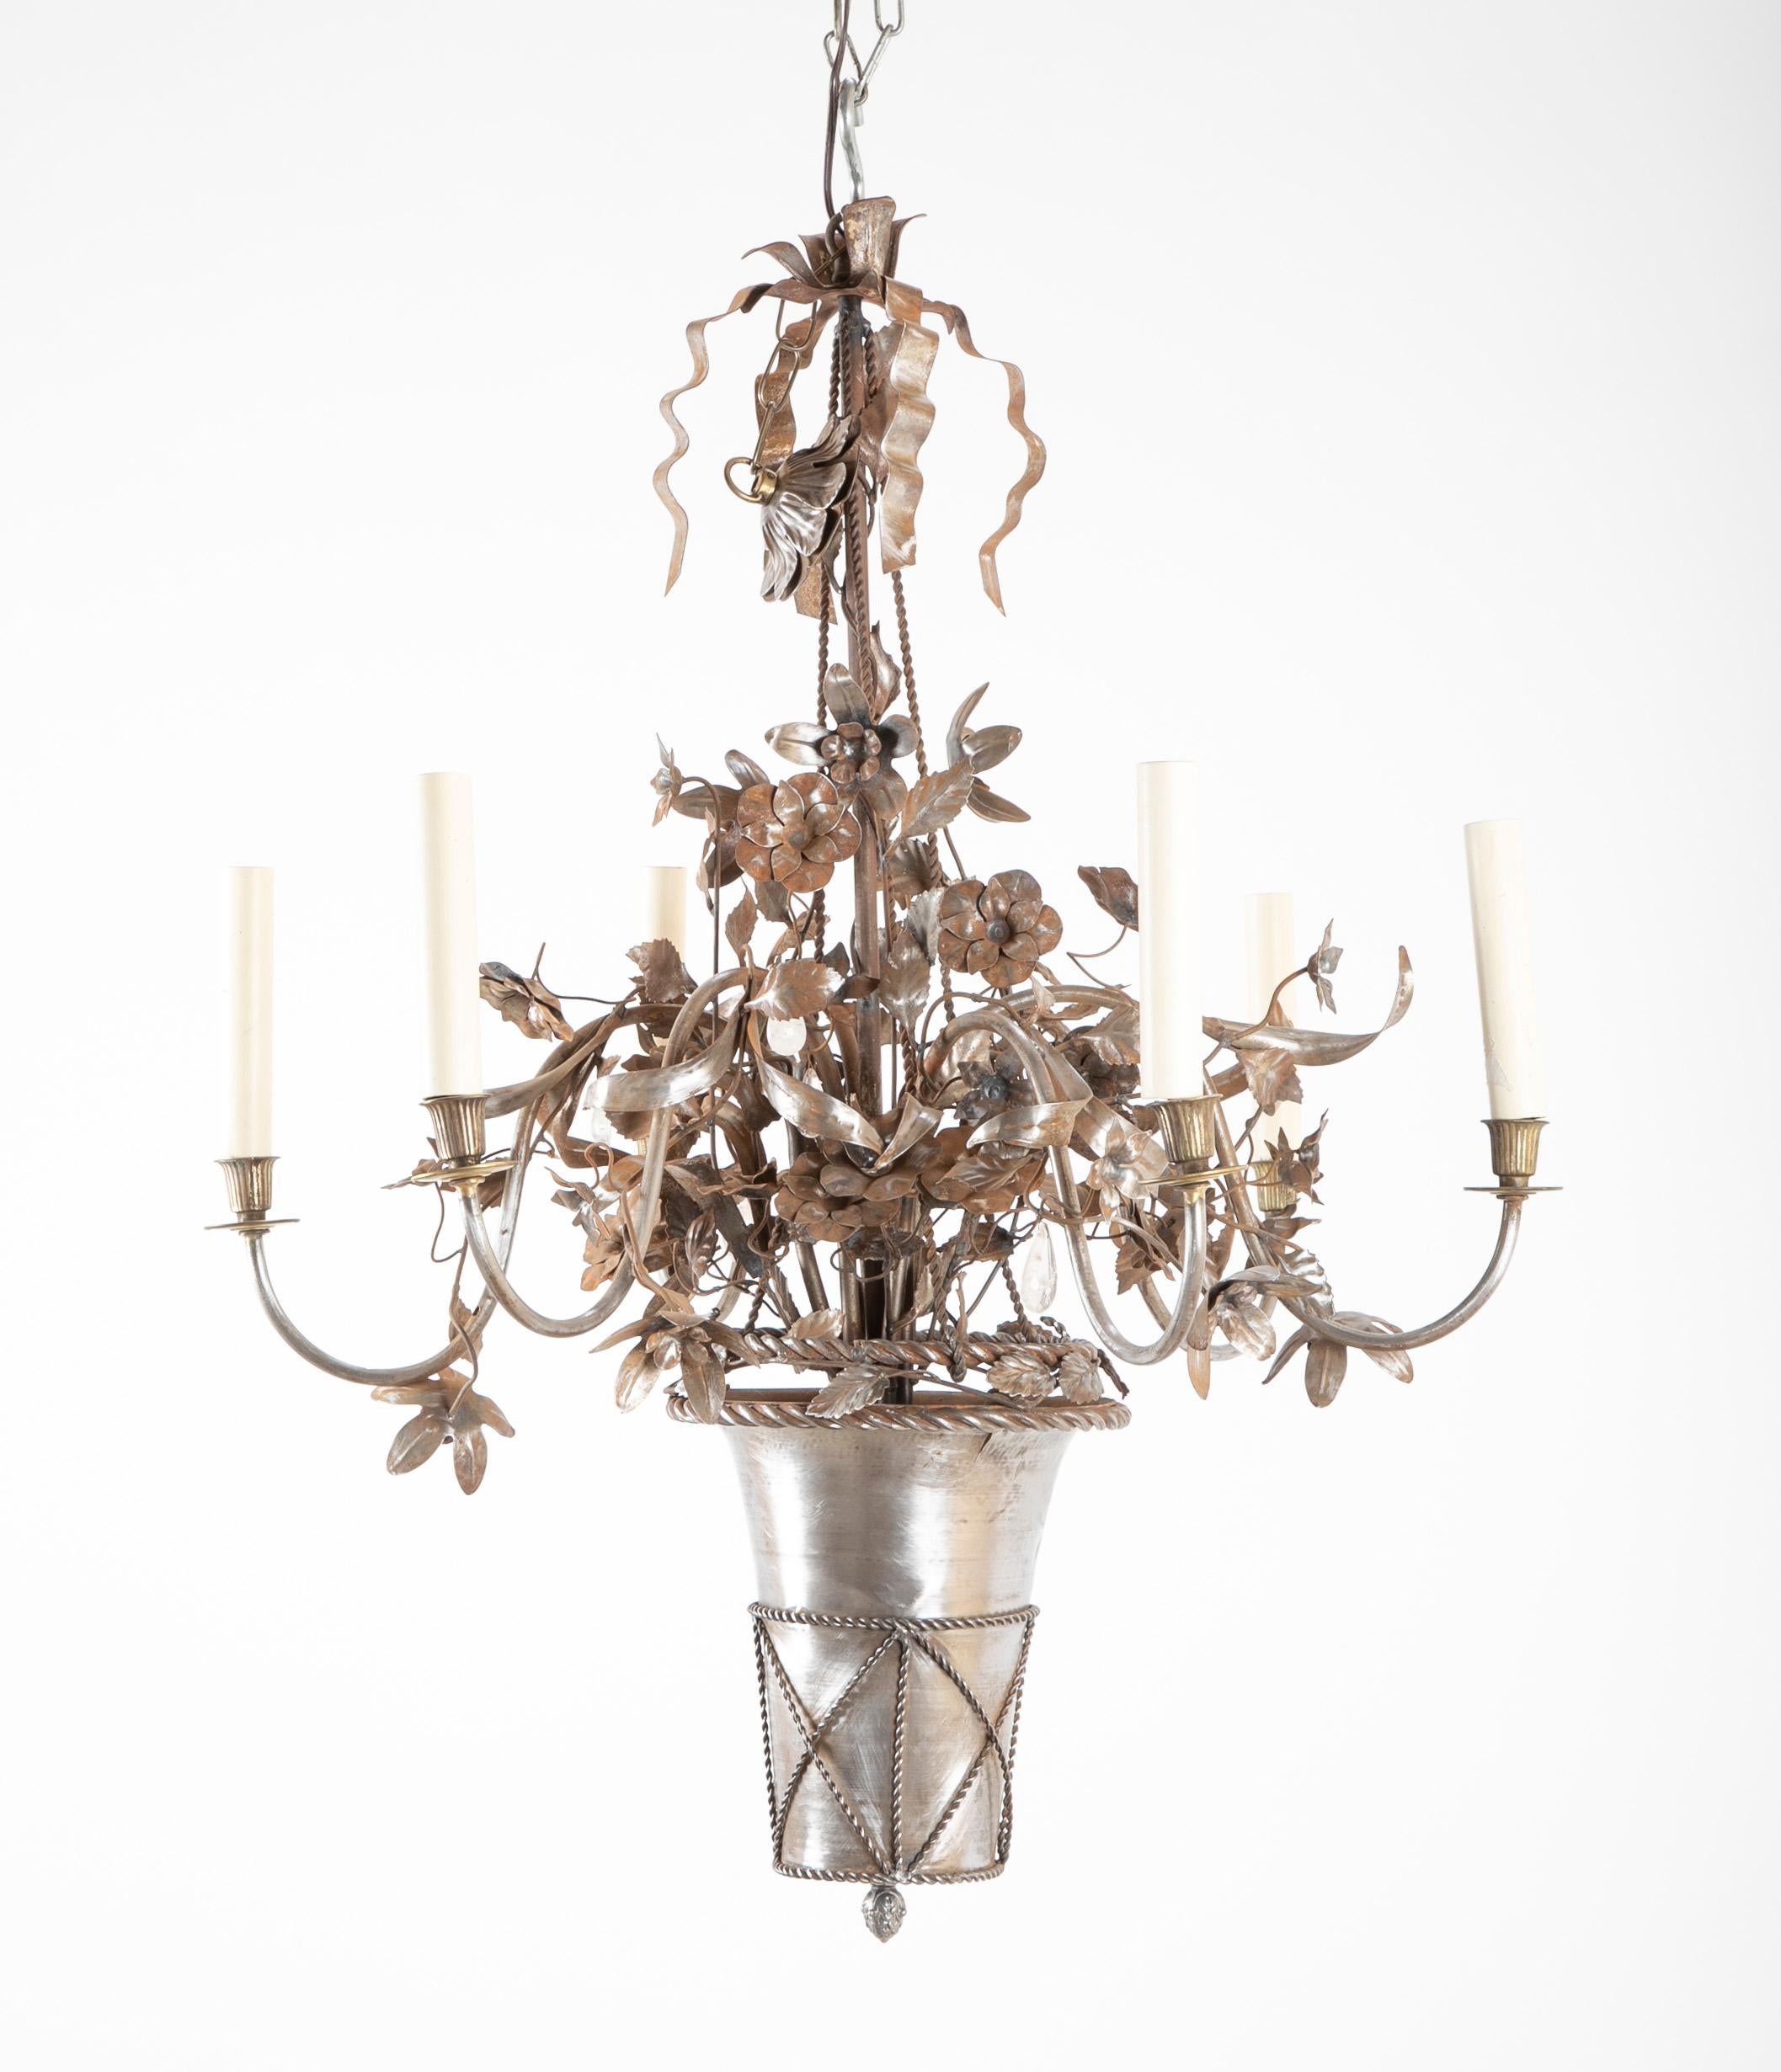 Vintage Steel Floral Chandelier with Basket, Bow Knots and Ribbons For Sale 14